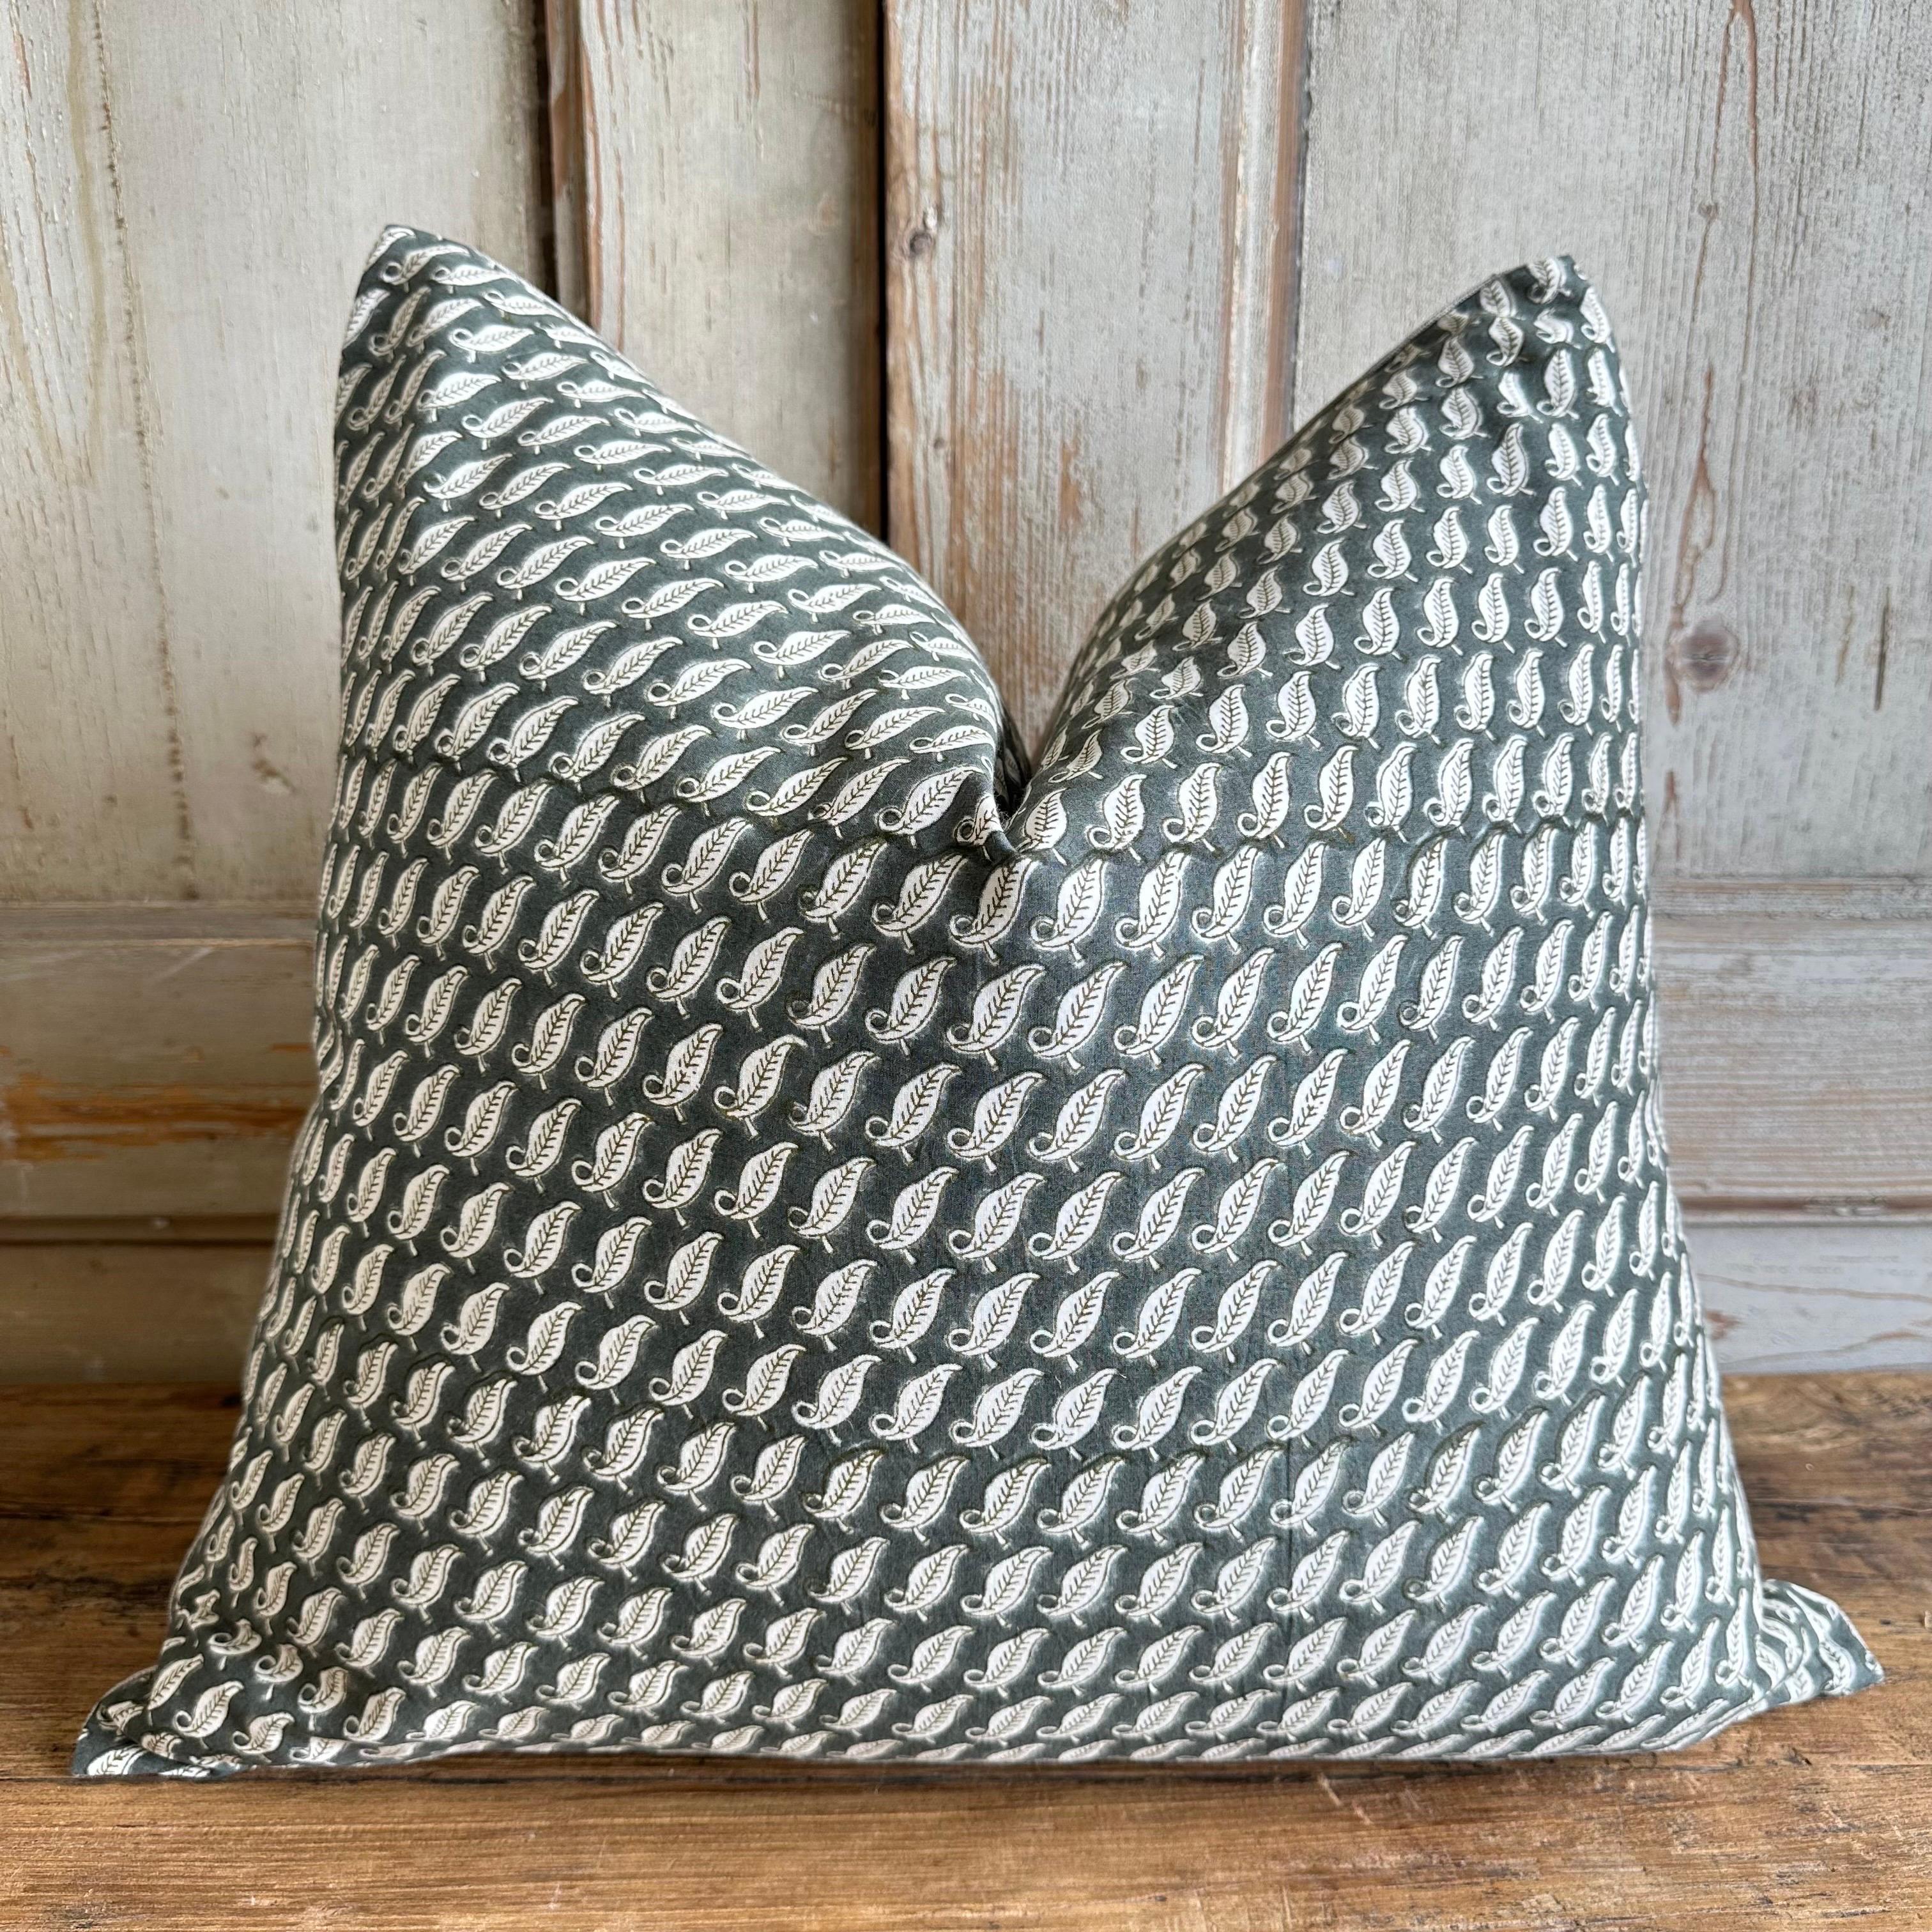 Custom made linen and cotton hand-blocked pillow with down feather insert.
Size: 22 x 22
Color: a deep blue gray hue, with white leaf pattern, backing is in a solid natural linen, with hidden zipper closure.
Machine wash cold
Lay flat to